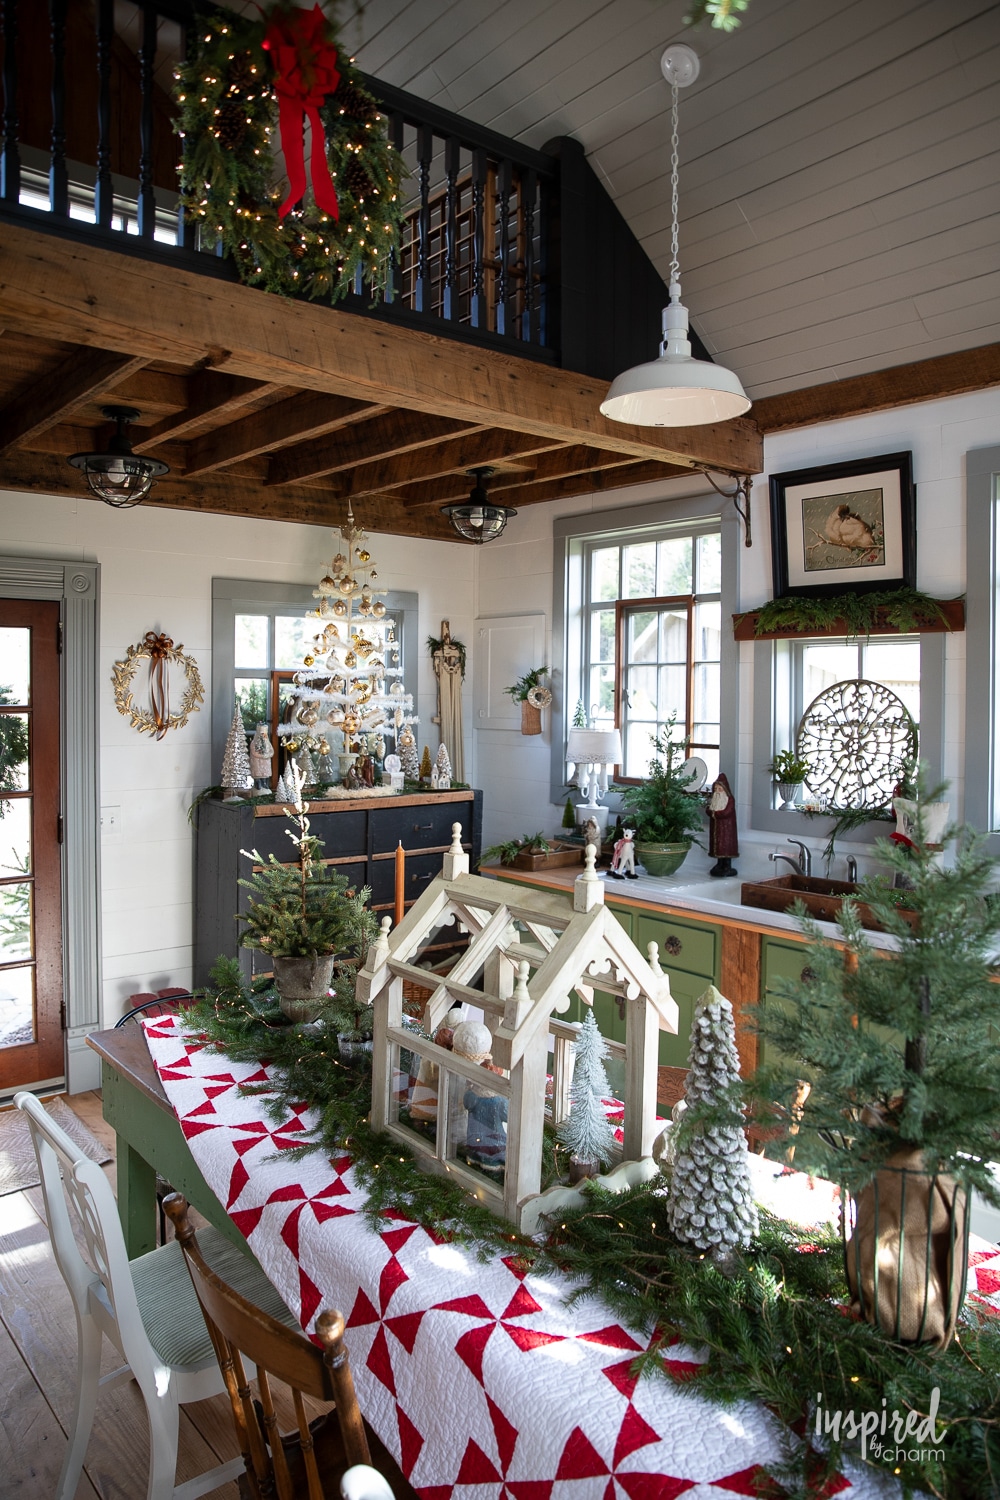 house with loft decorated for Christmas.